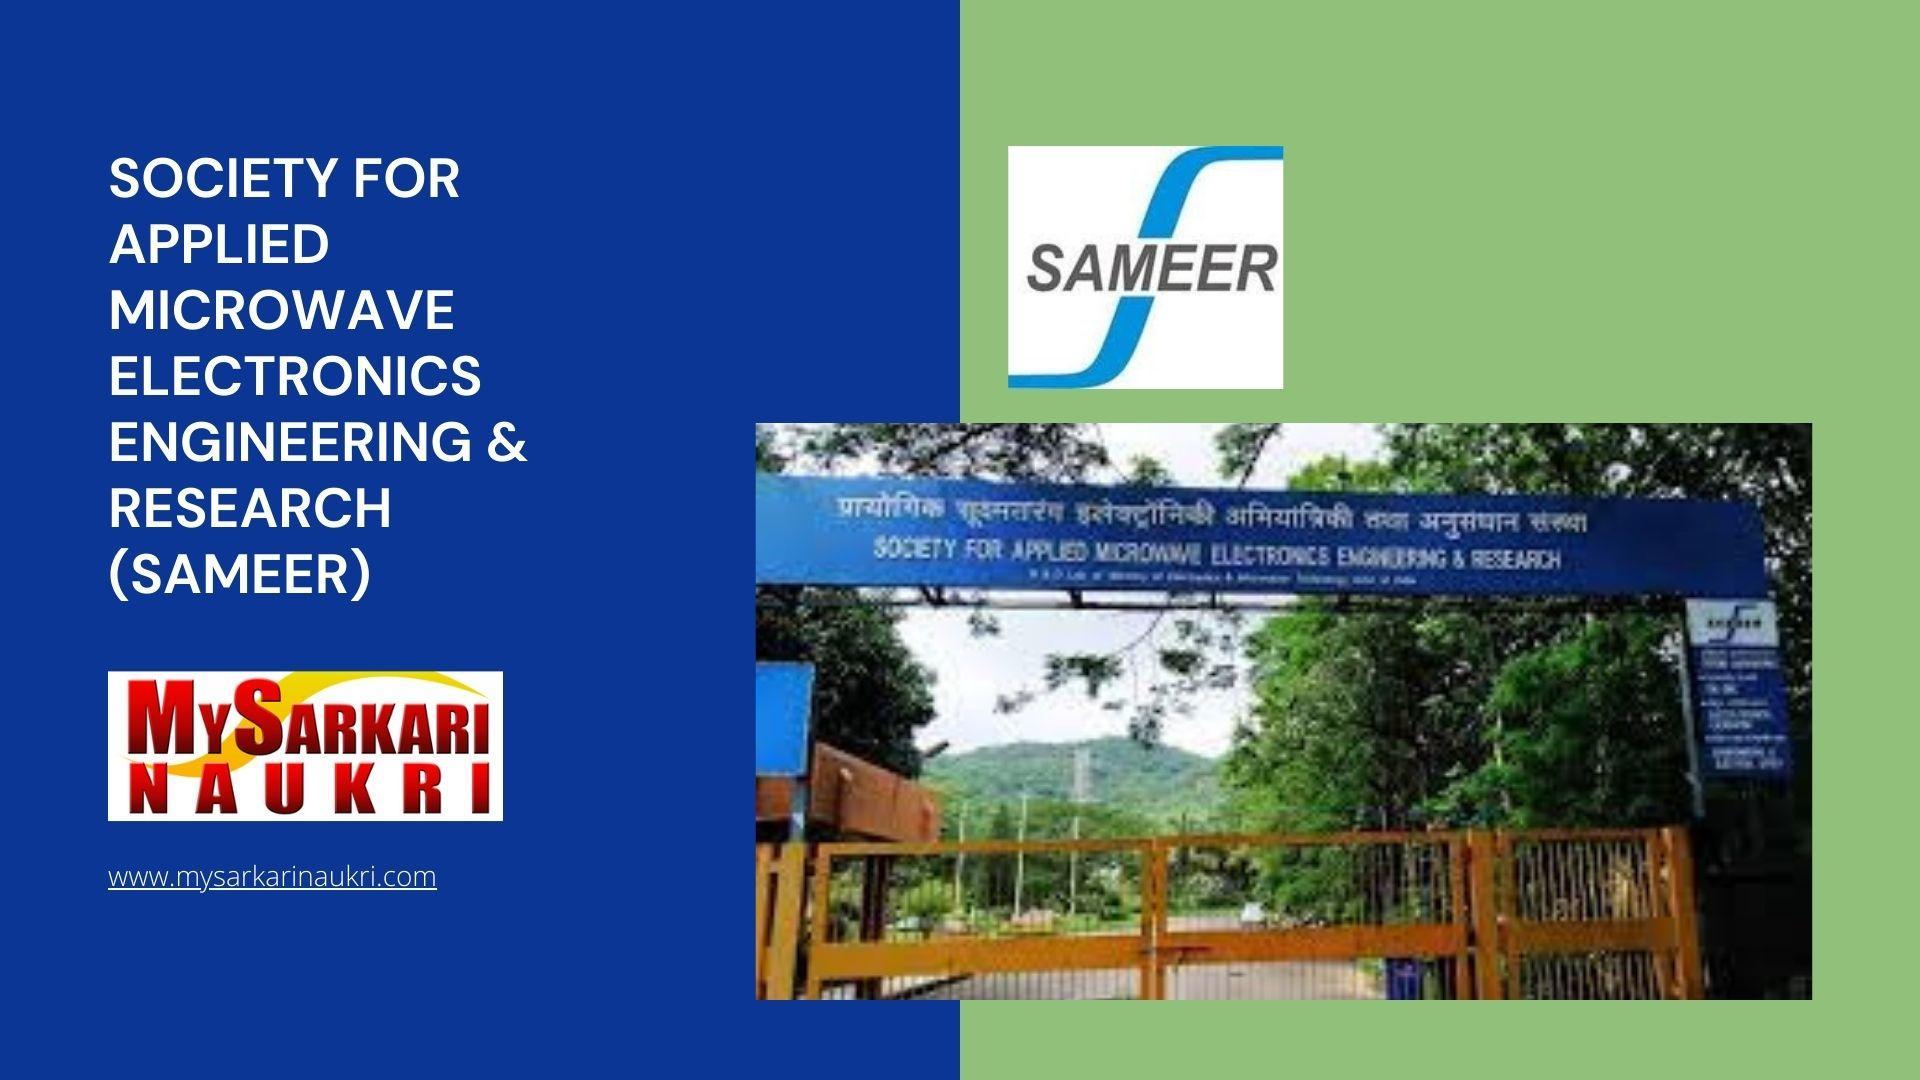 Society for Applied Microwave Electronics Engineering & Research (SAMEER) Recruitment